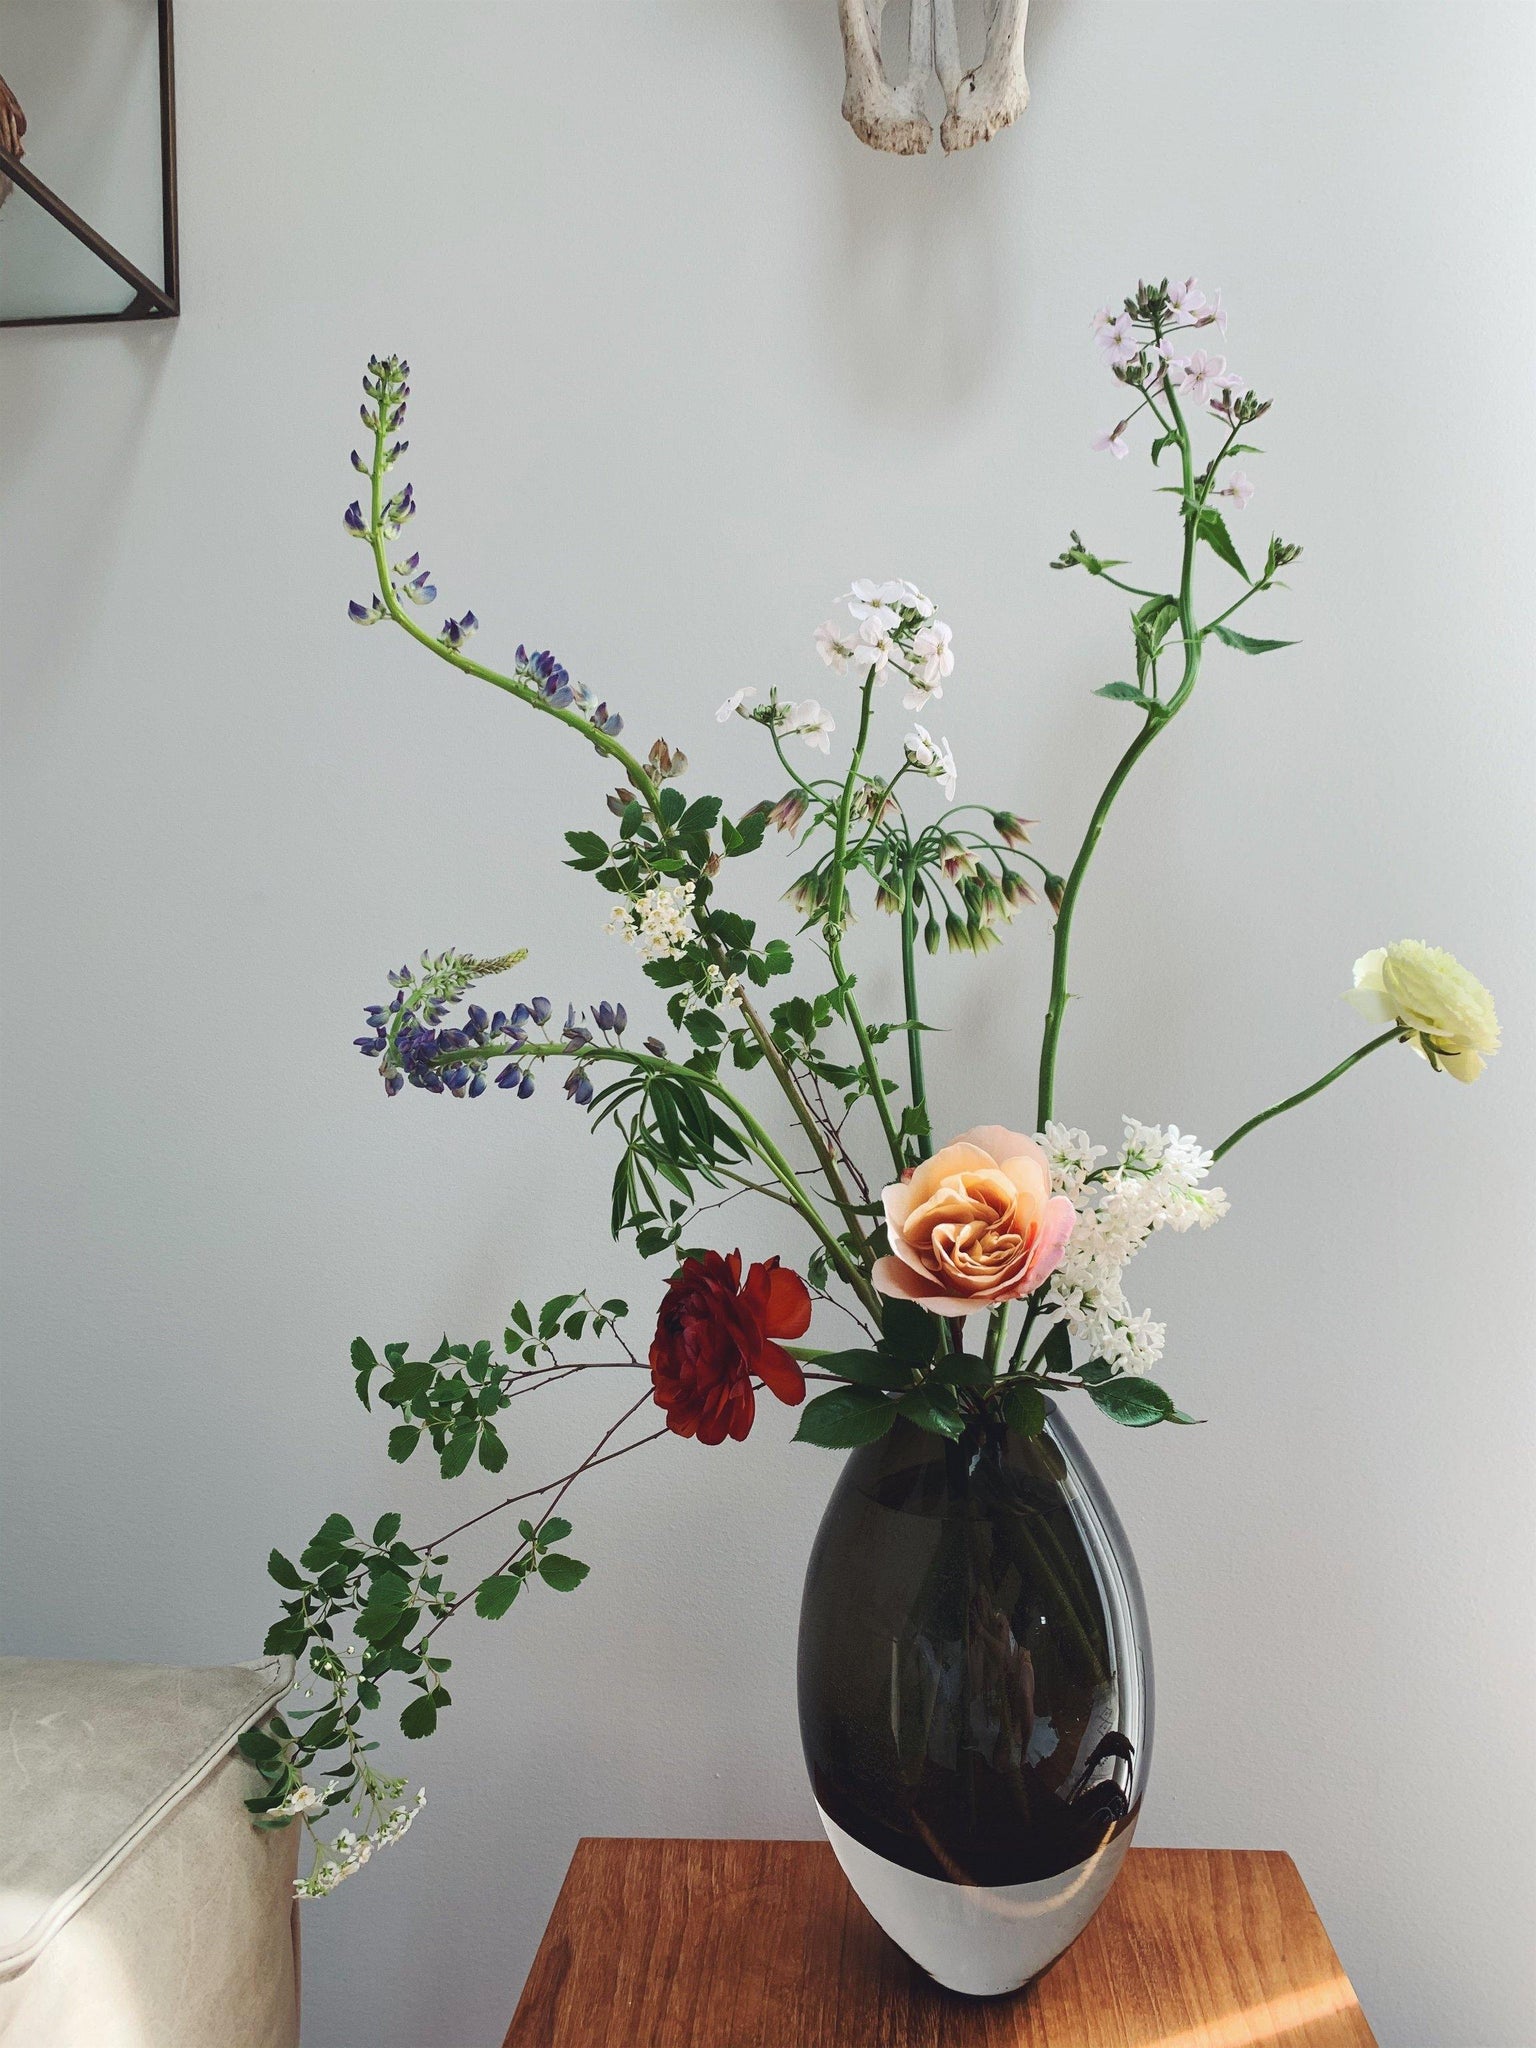 Subscriptions - Flower Subscription -Bi-Weekly Signature Bouquet - The Wild Bunch Florals - The Wild Bunch Florist - Vancouver Flower Shop Delivery